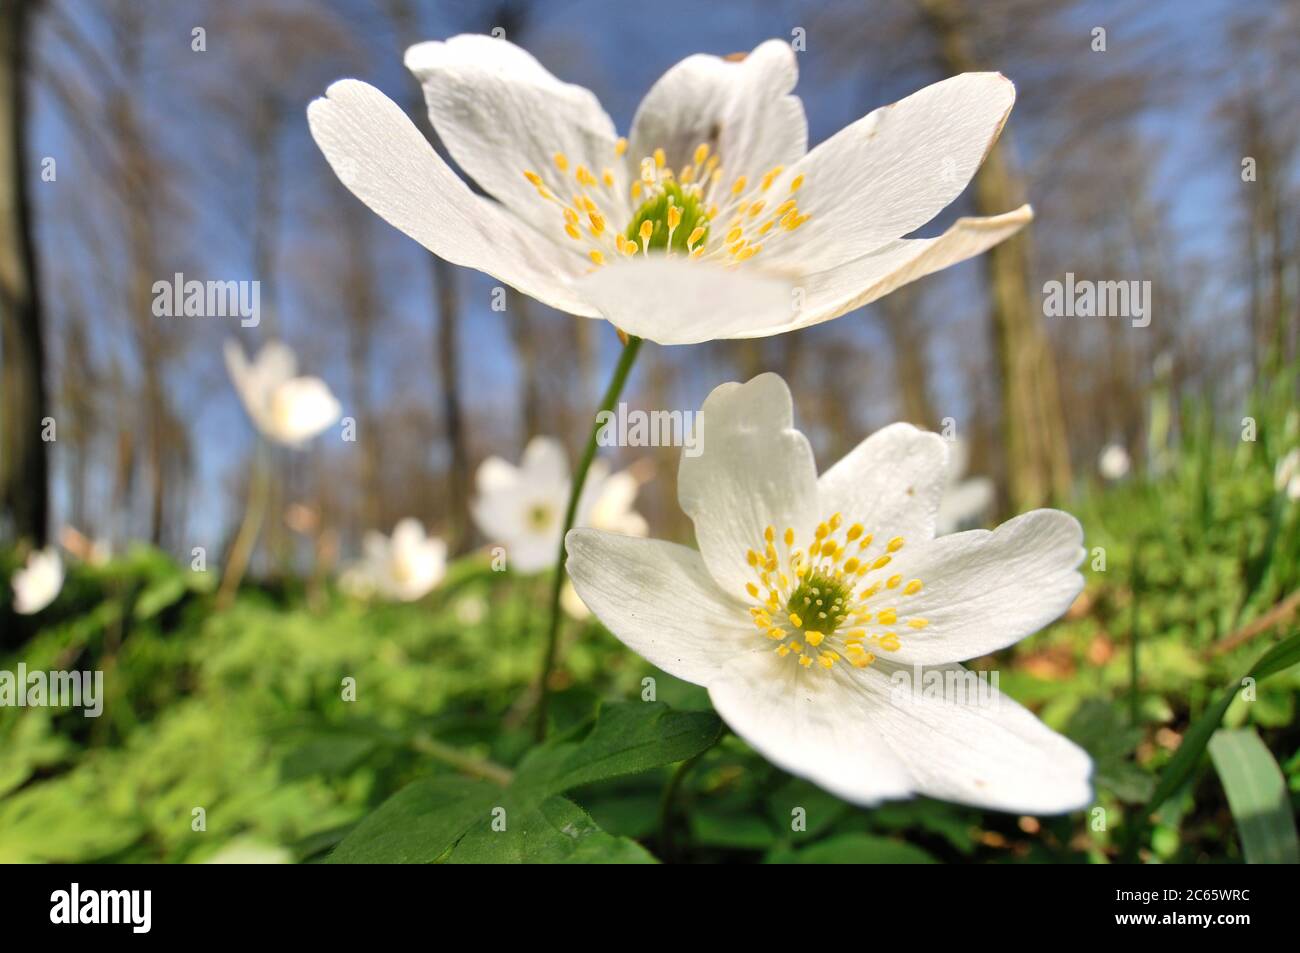 Anemone nemorosa is an early-spring flowering plant in the Genus Anemone in the family Ranunculaceae. Stock Photo